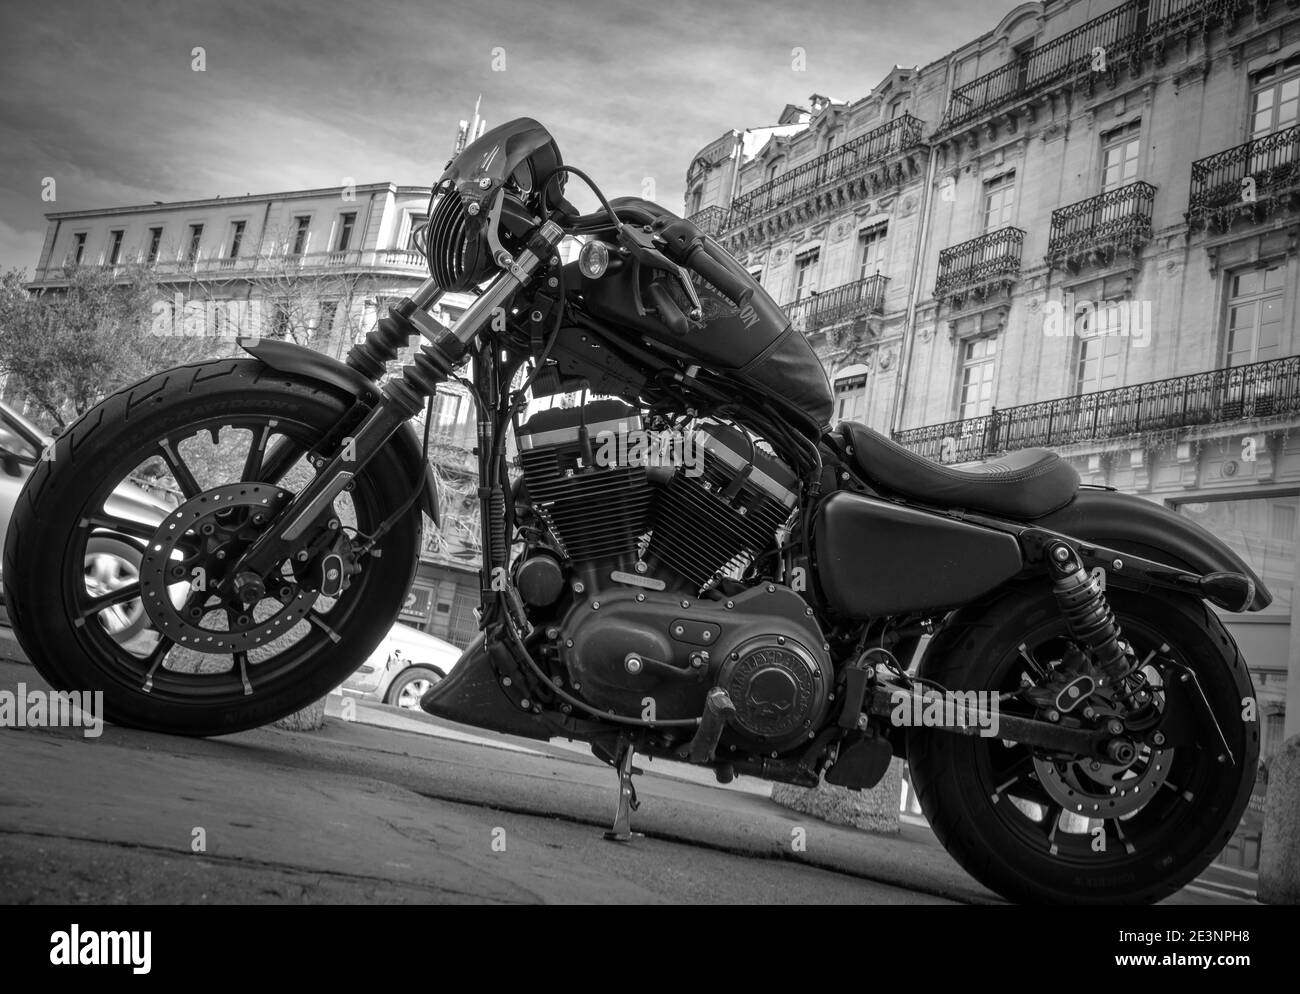 Harley Davidson motorcycle on a street in a french city with old historical buildings in the background - black and white Stock Photo